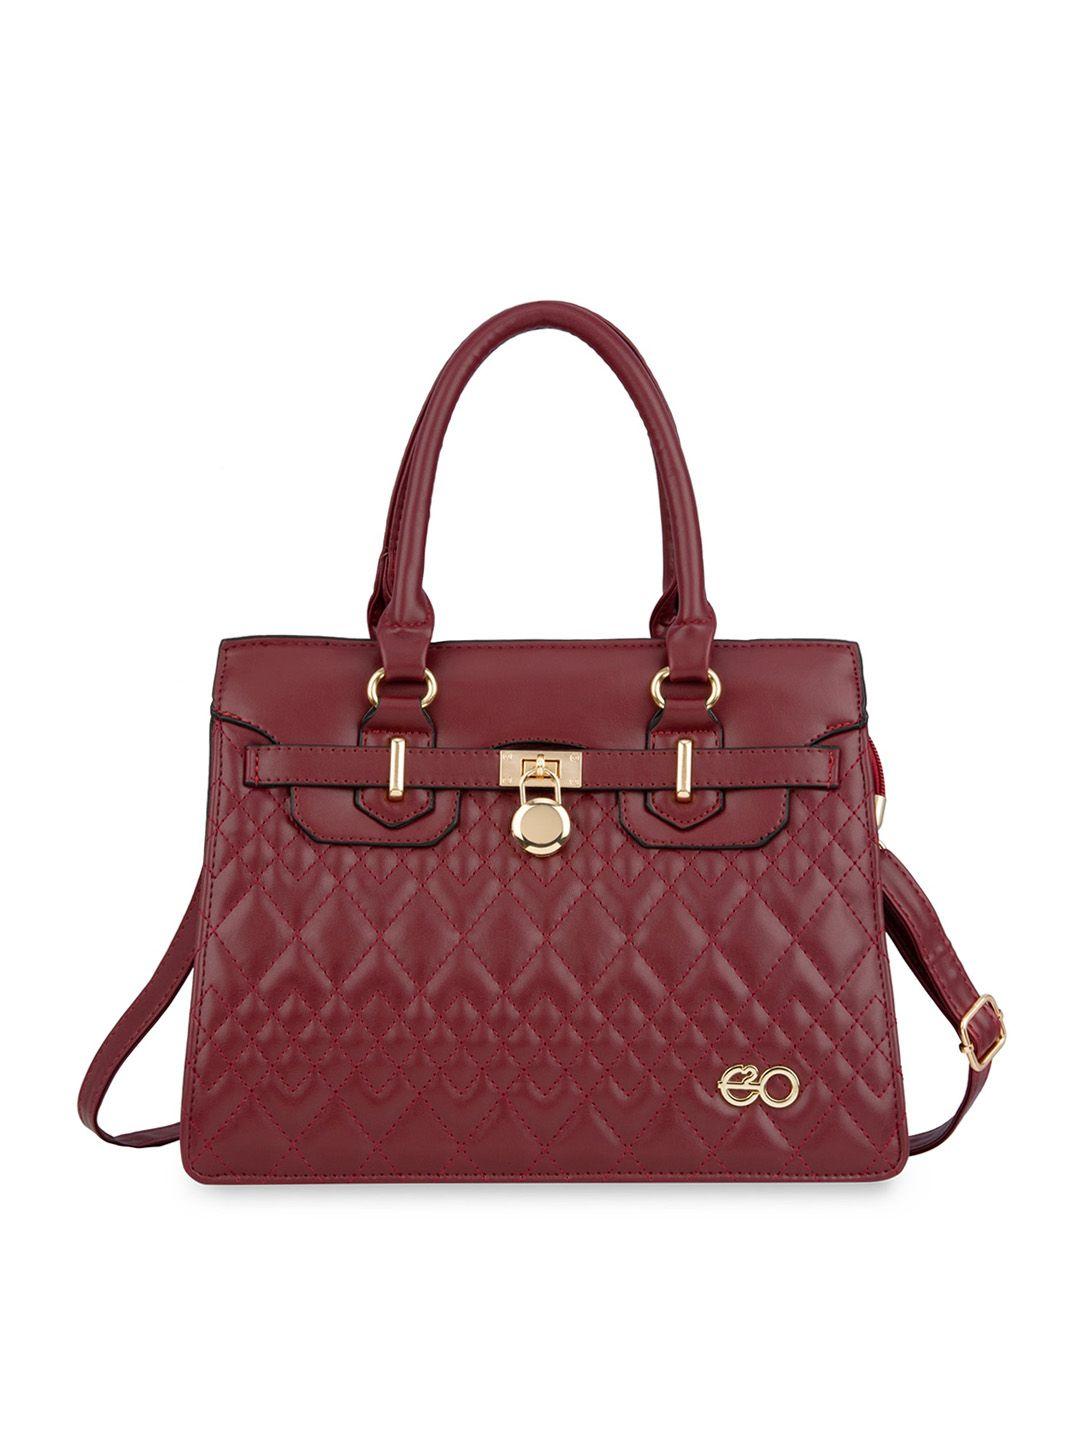 e2o maroon textured pu structured handheld bag with quilted